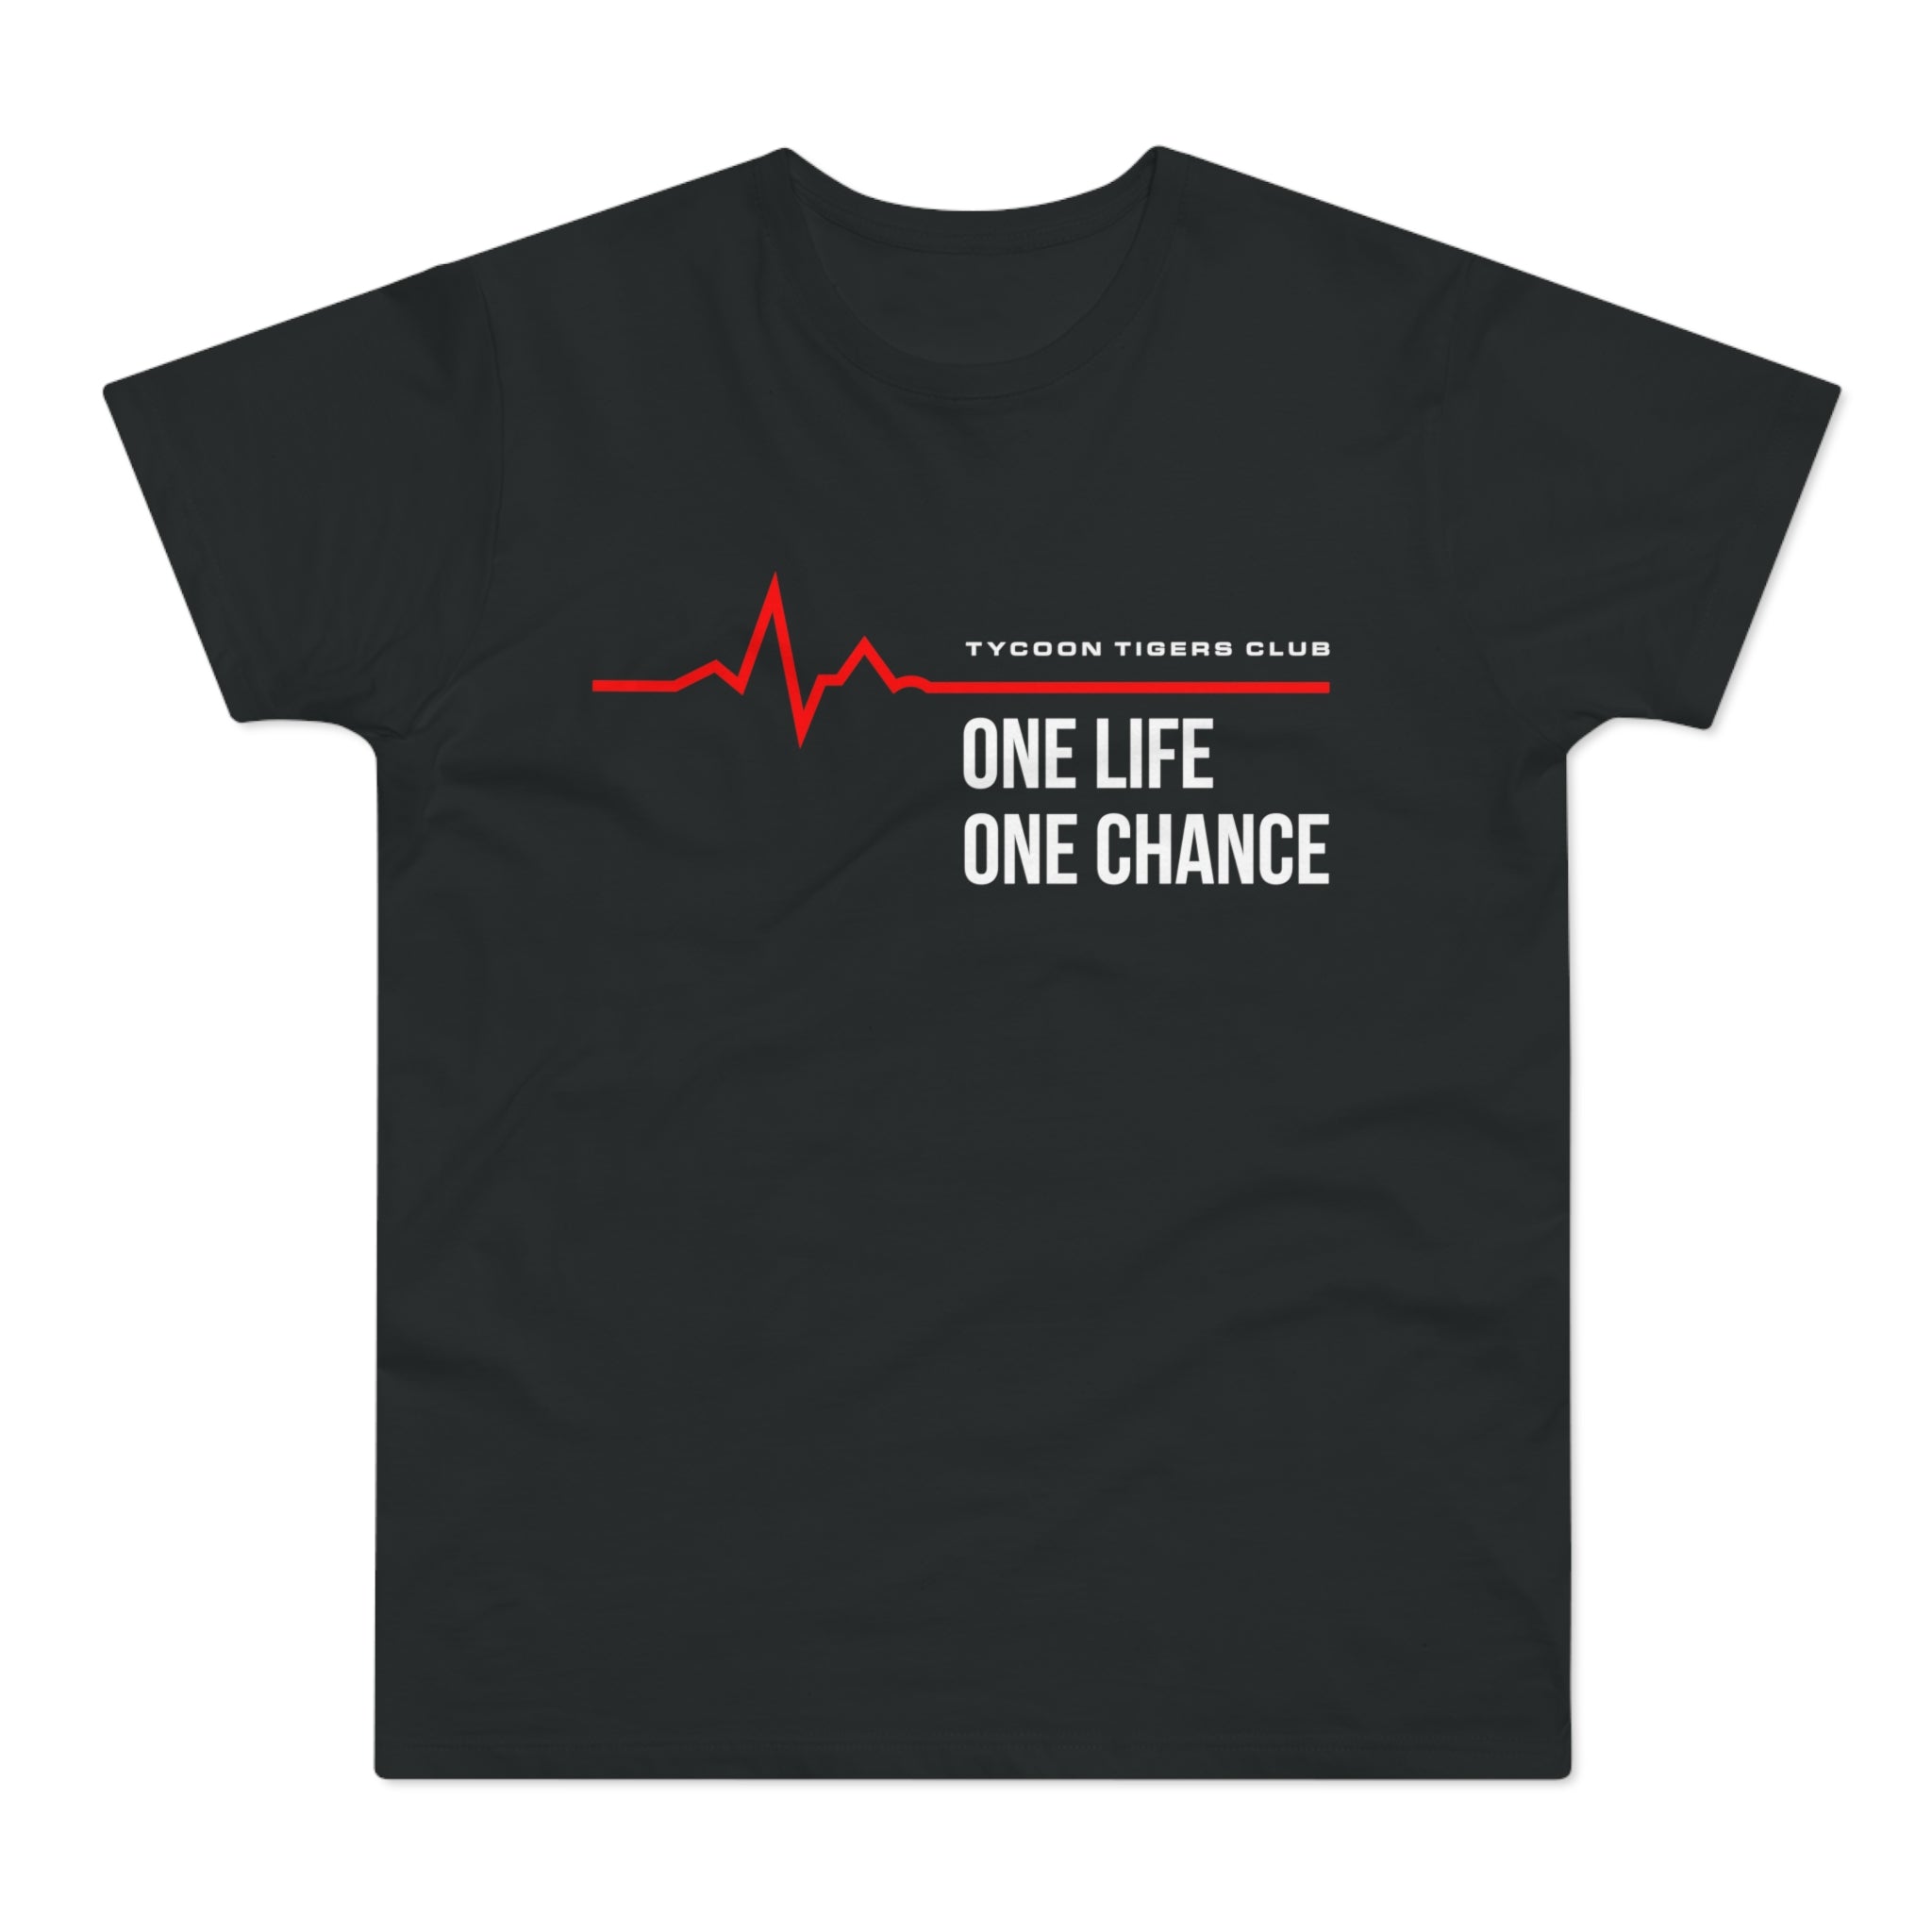 One Life - T-Shirt